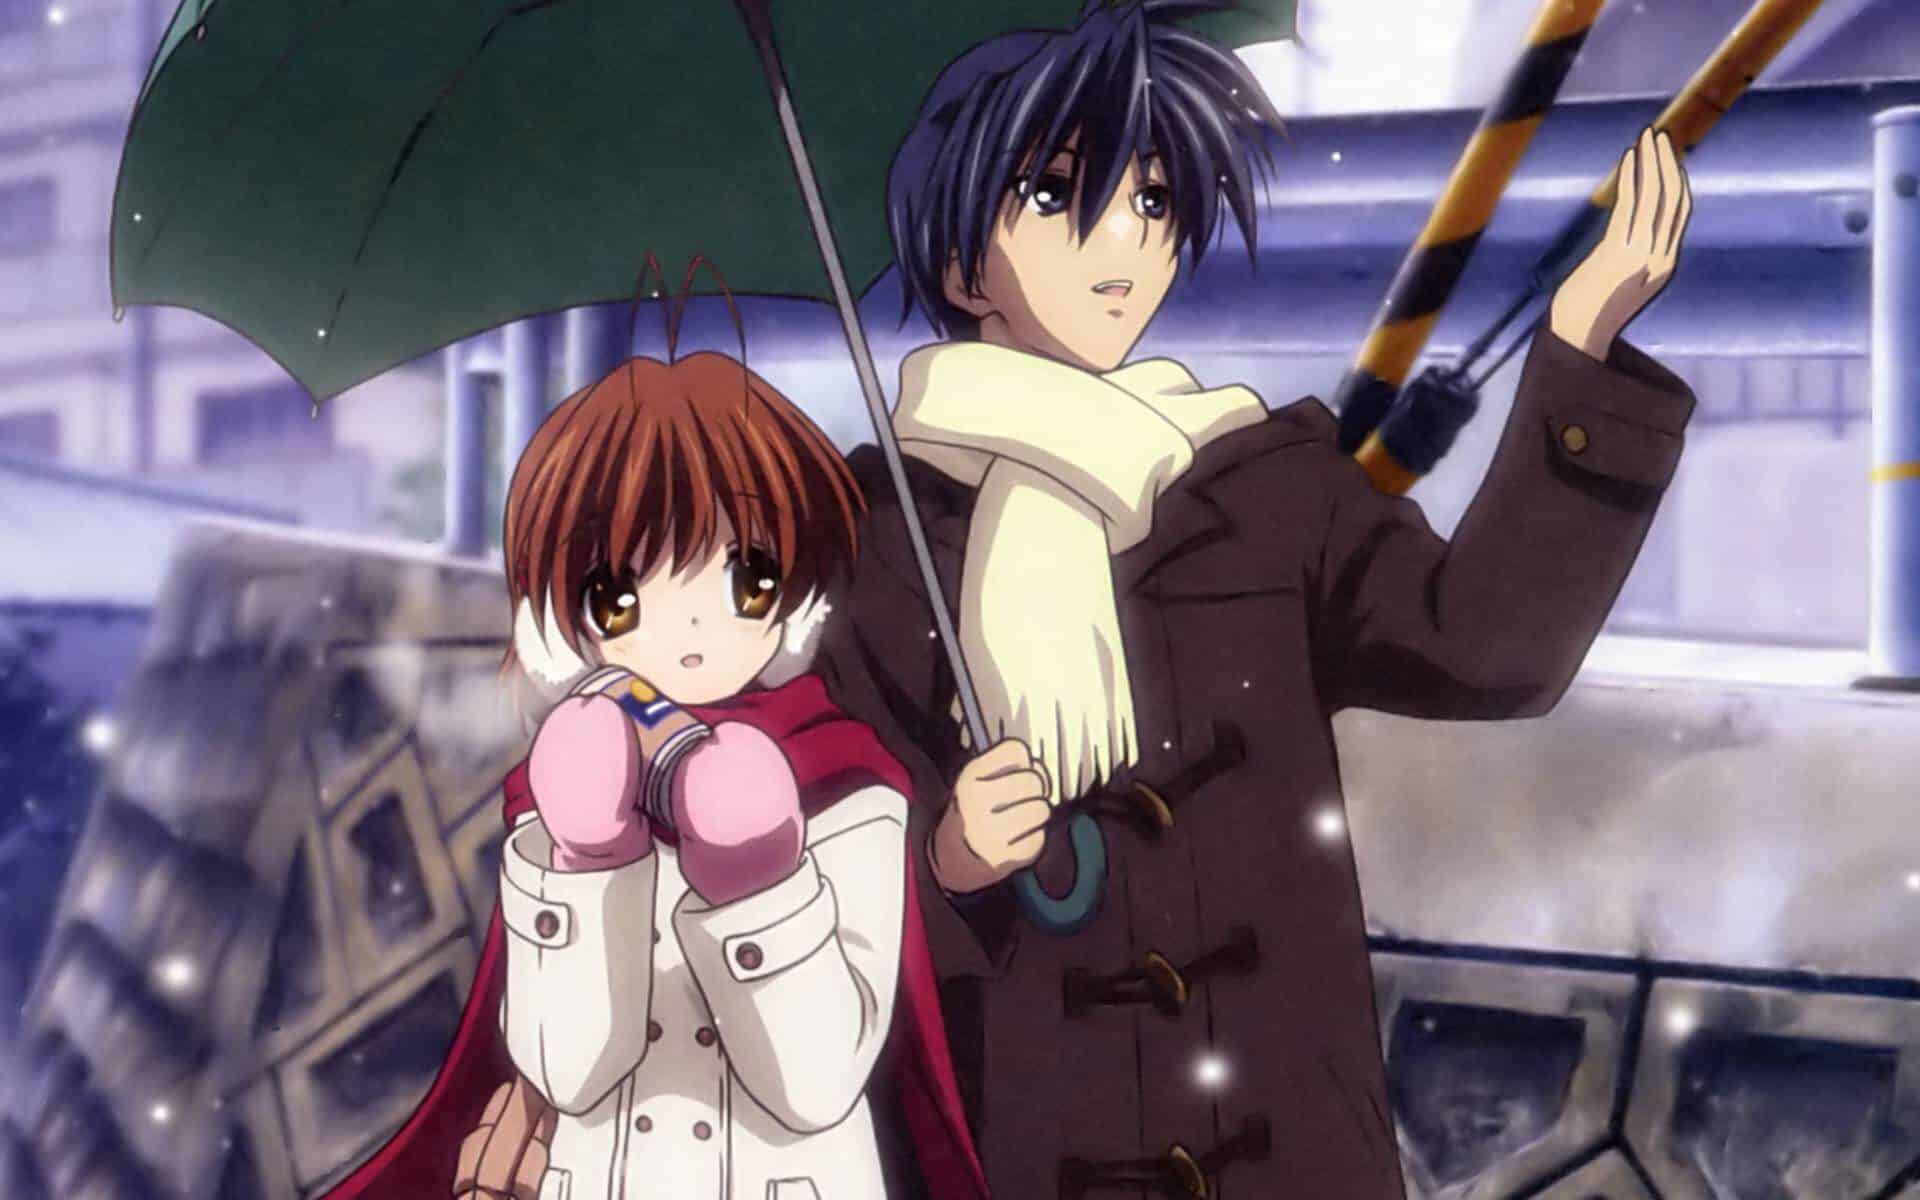 Boy holding an umbrella for the girl in a snowy day.